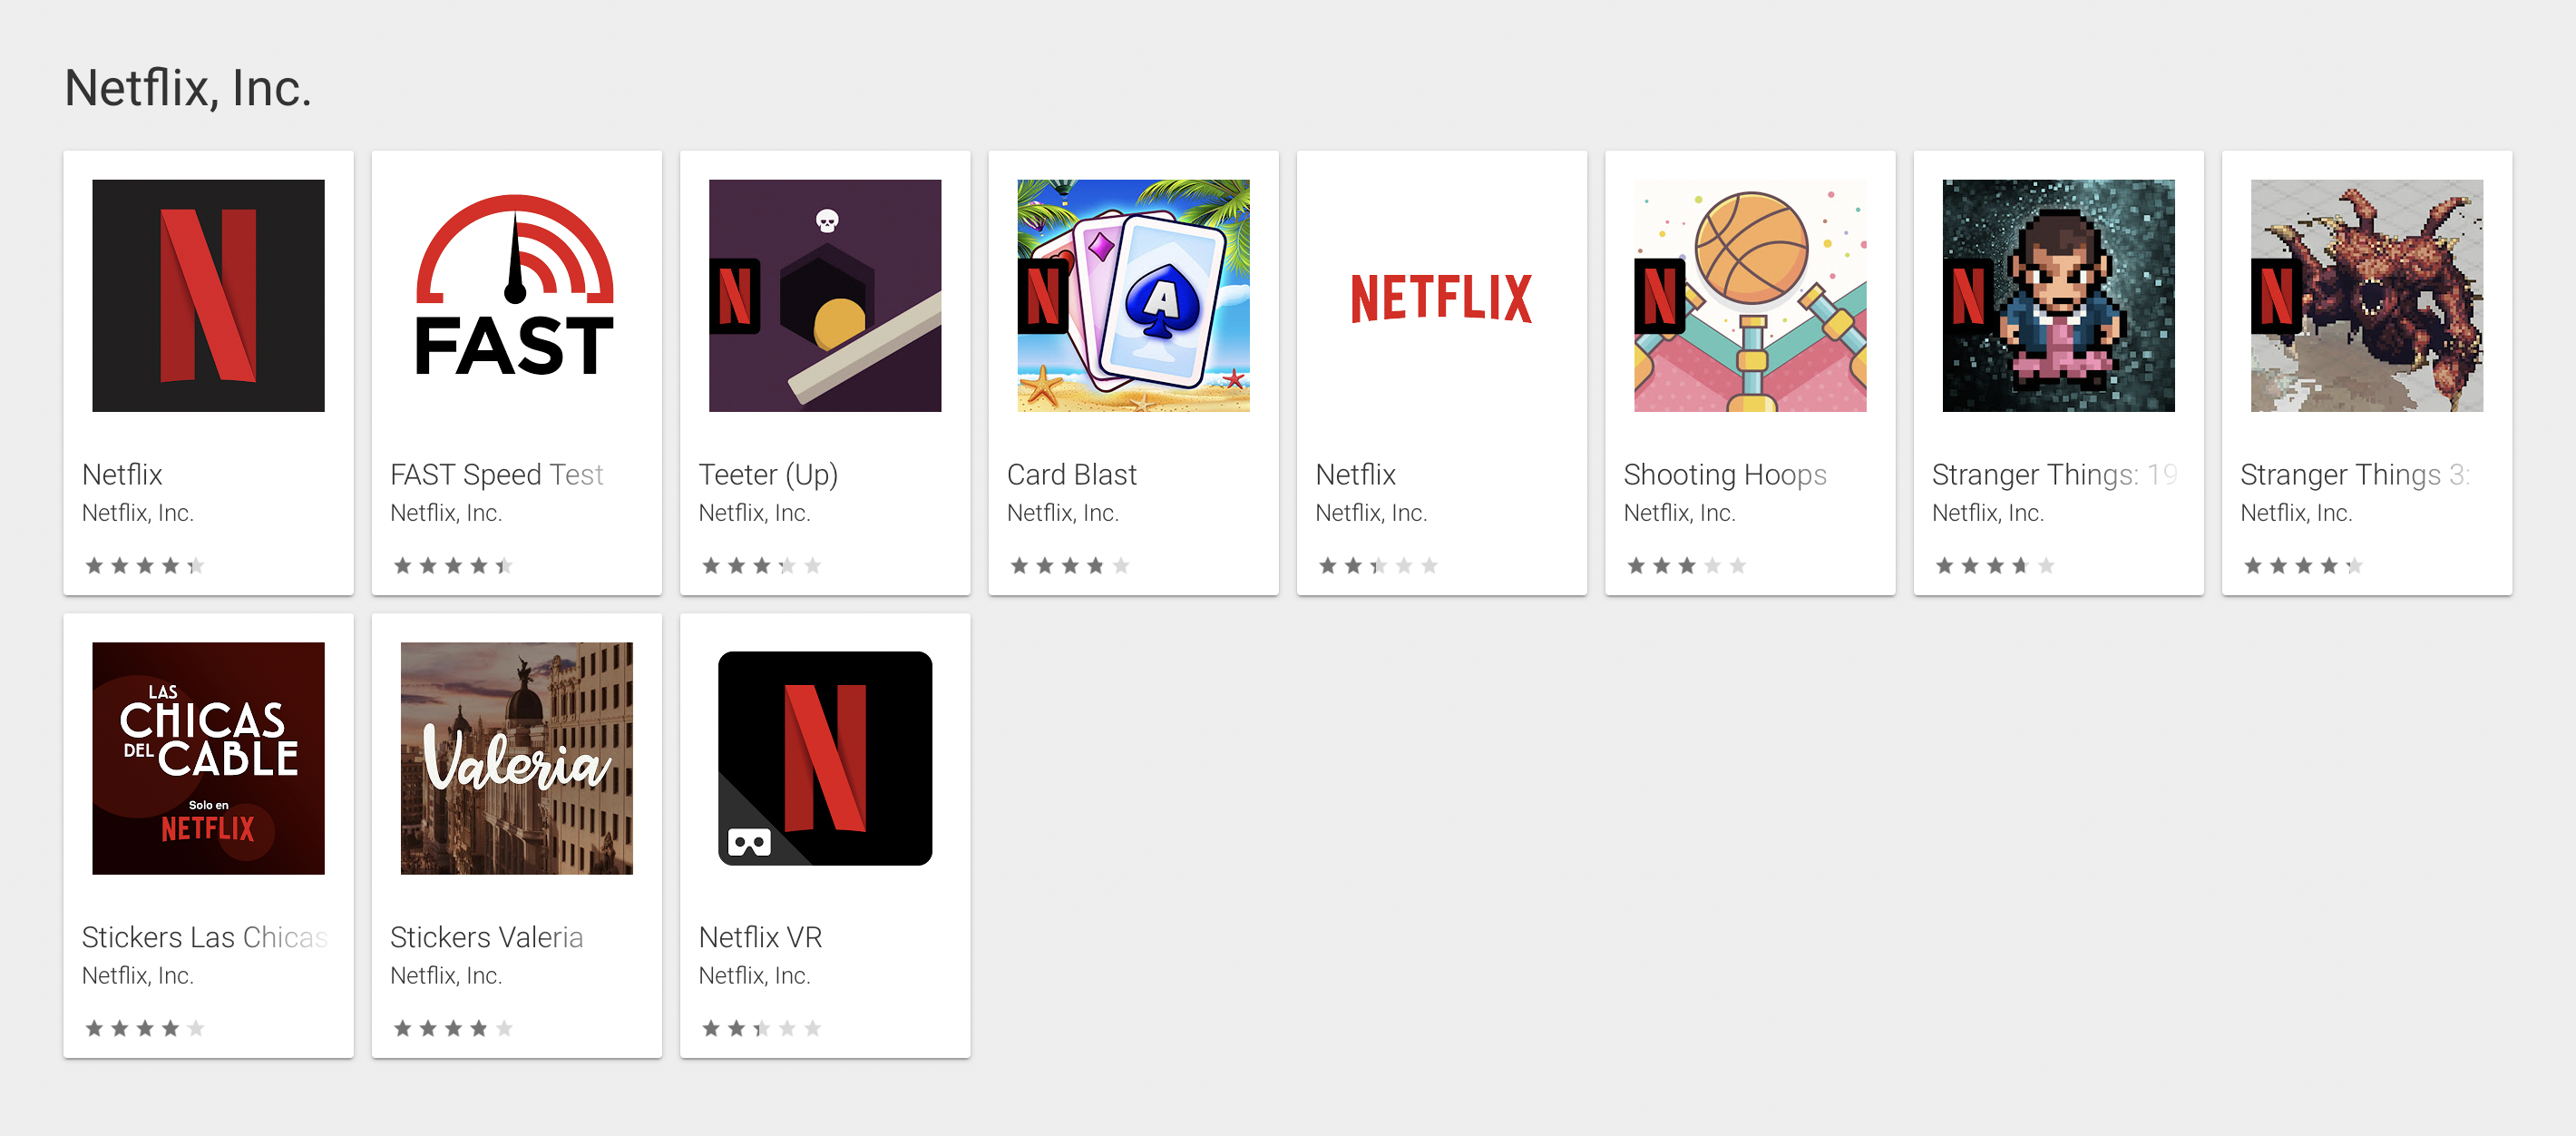 Bloomberg: Netflix games to be available on the App Store individually, require account sign in